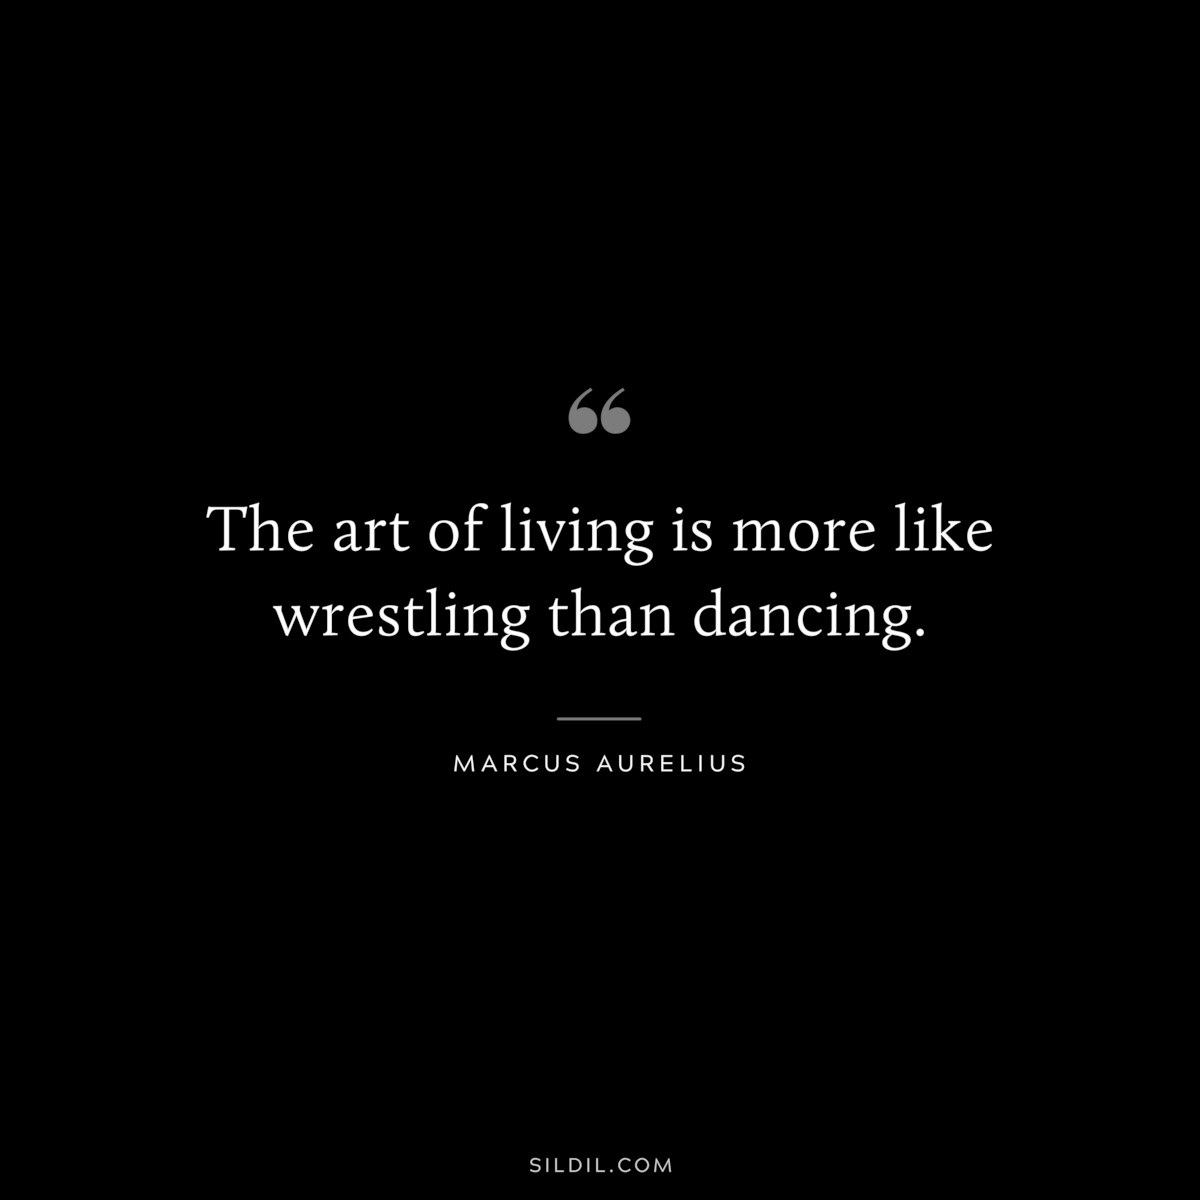 The art of living is more like wrestling than dancing. ― Marcus Aurelius